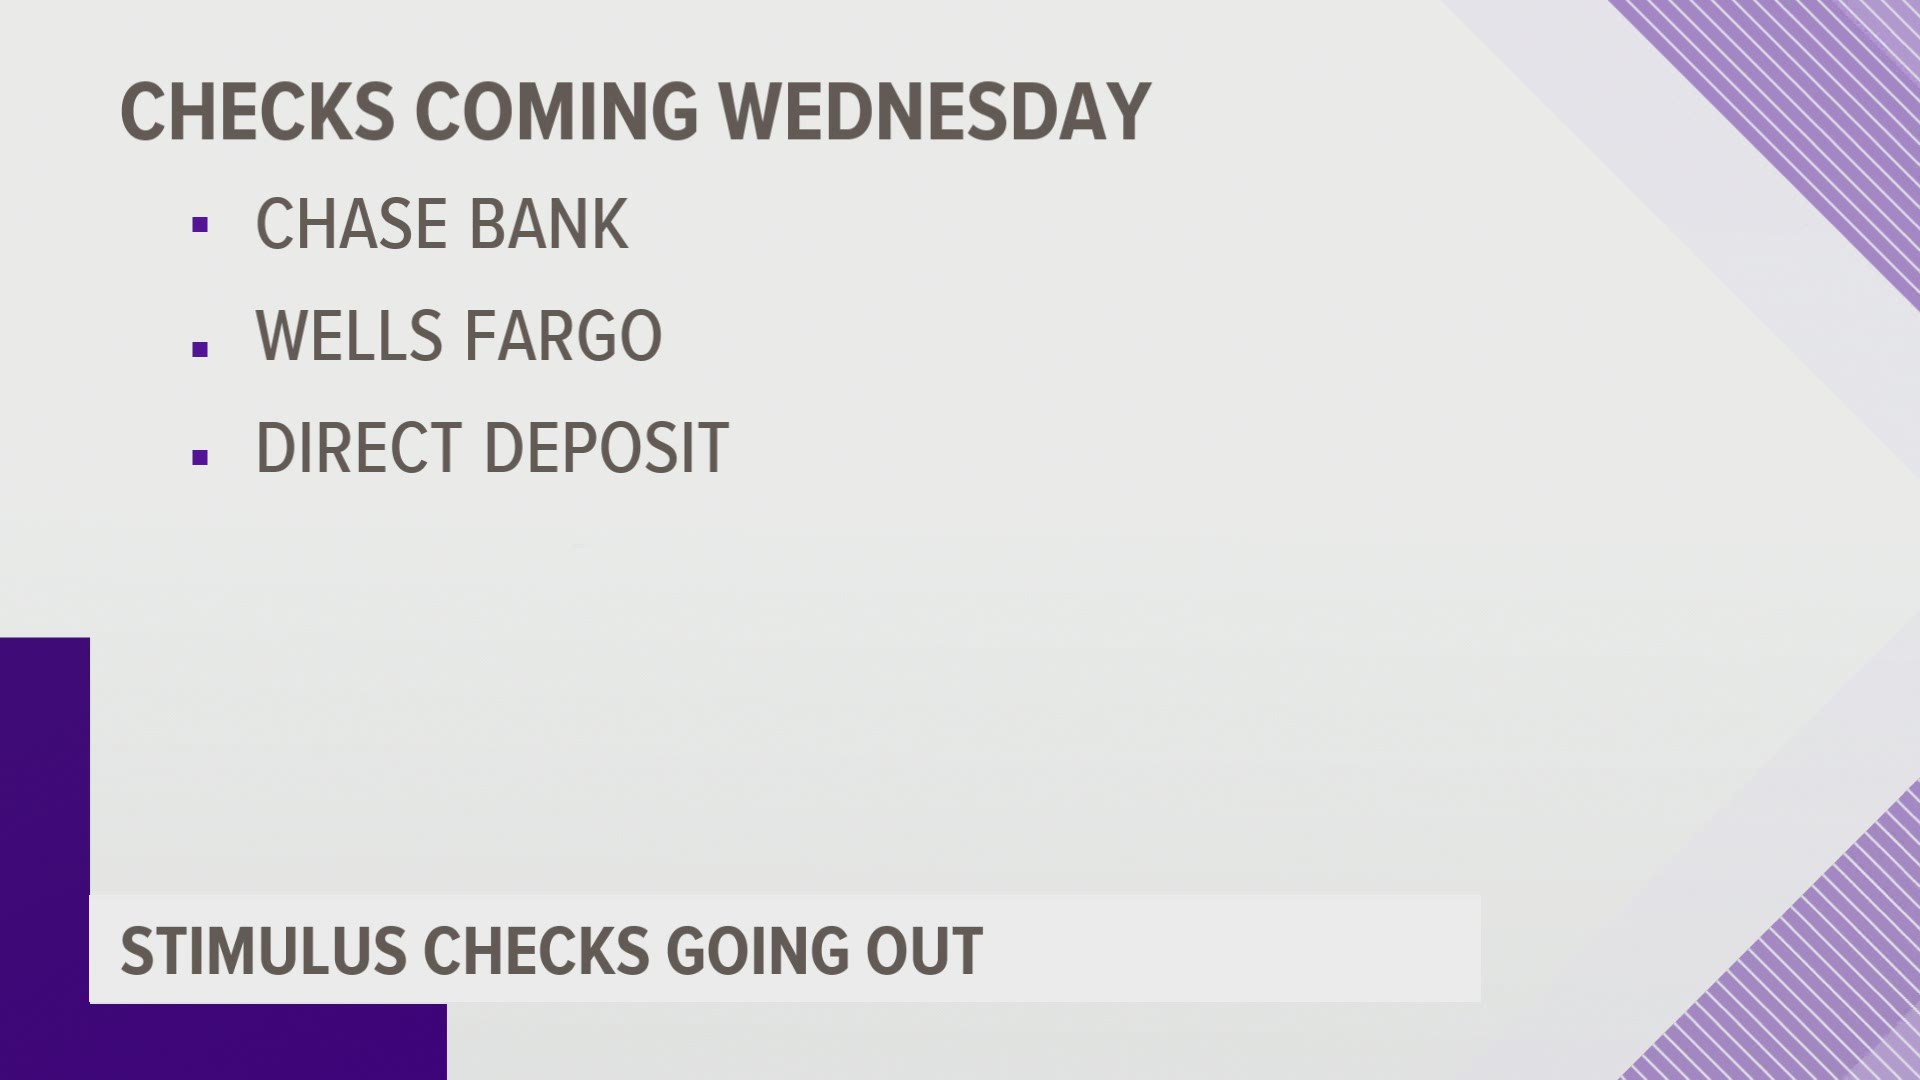 Tens of millions of stimulus checks should be available in bank accounts starting Wednesday, March 17. Here's the latest timeline on when you might see the money.